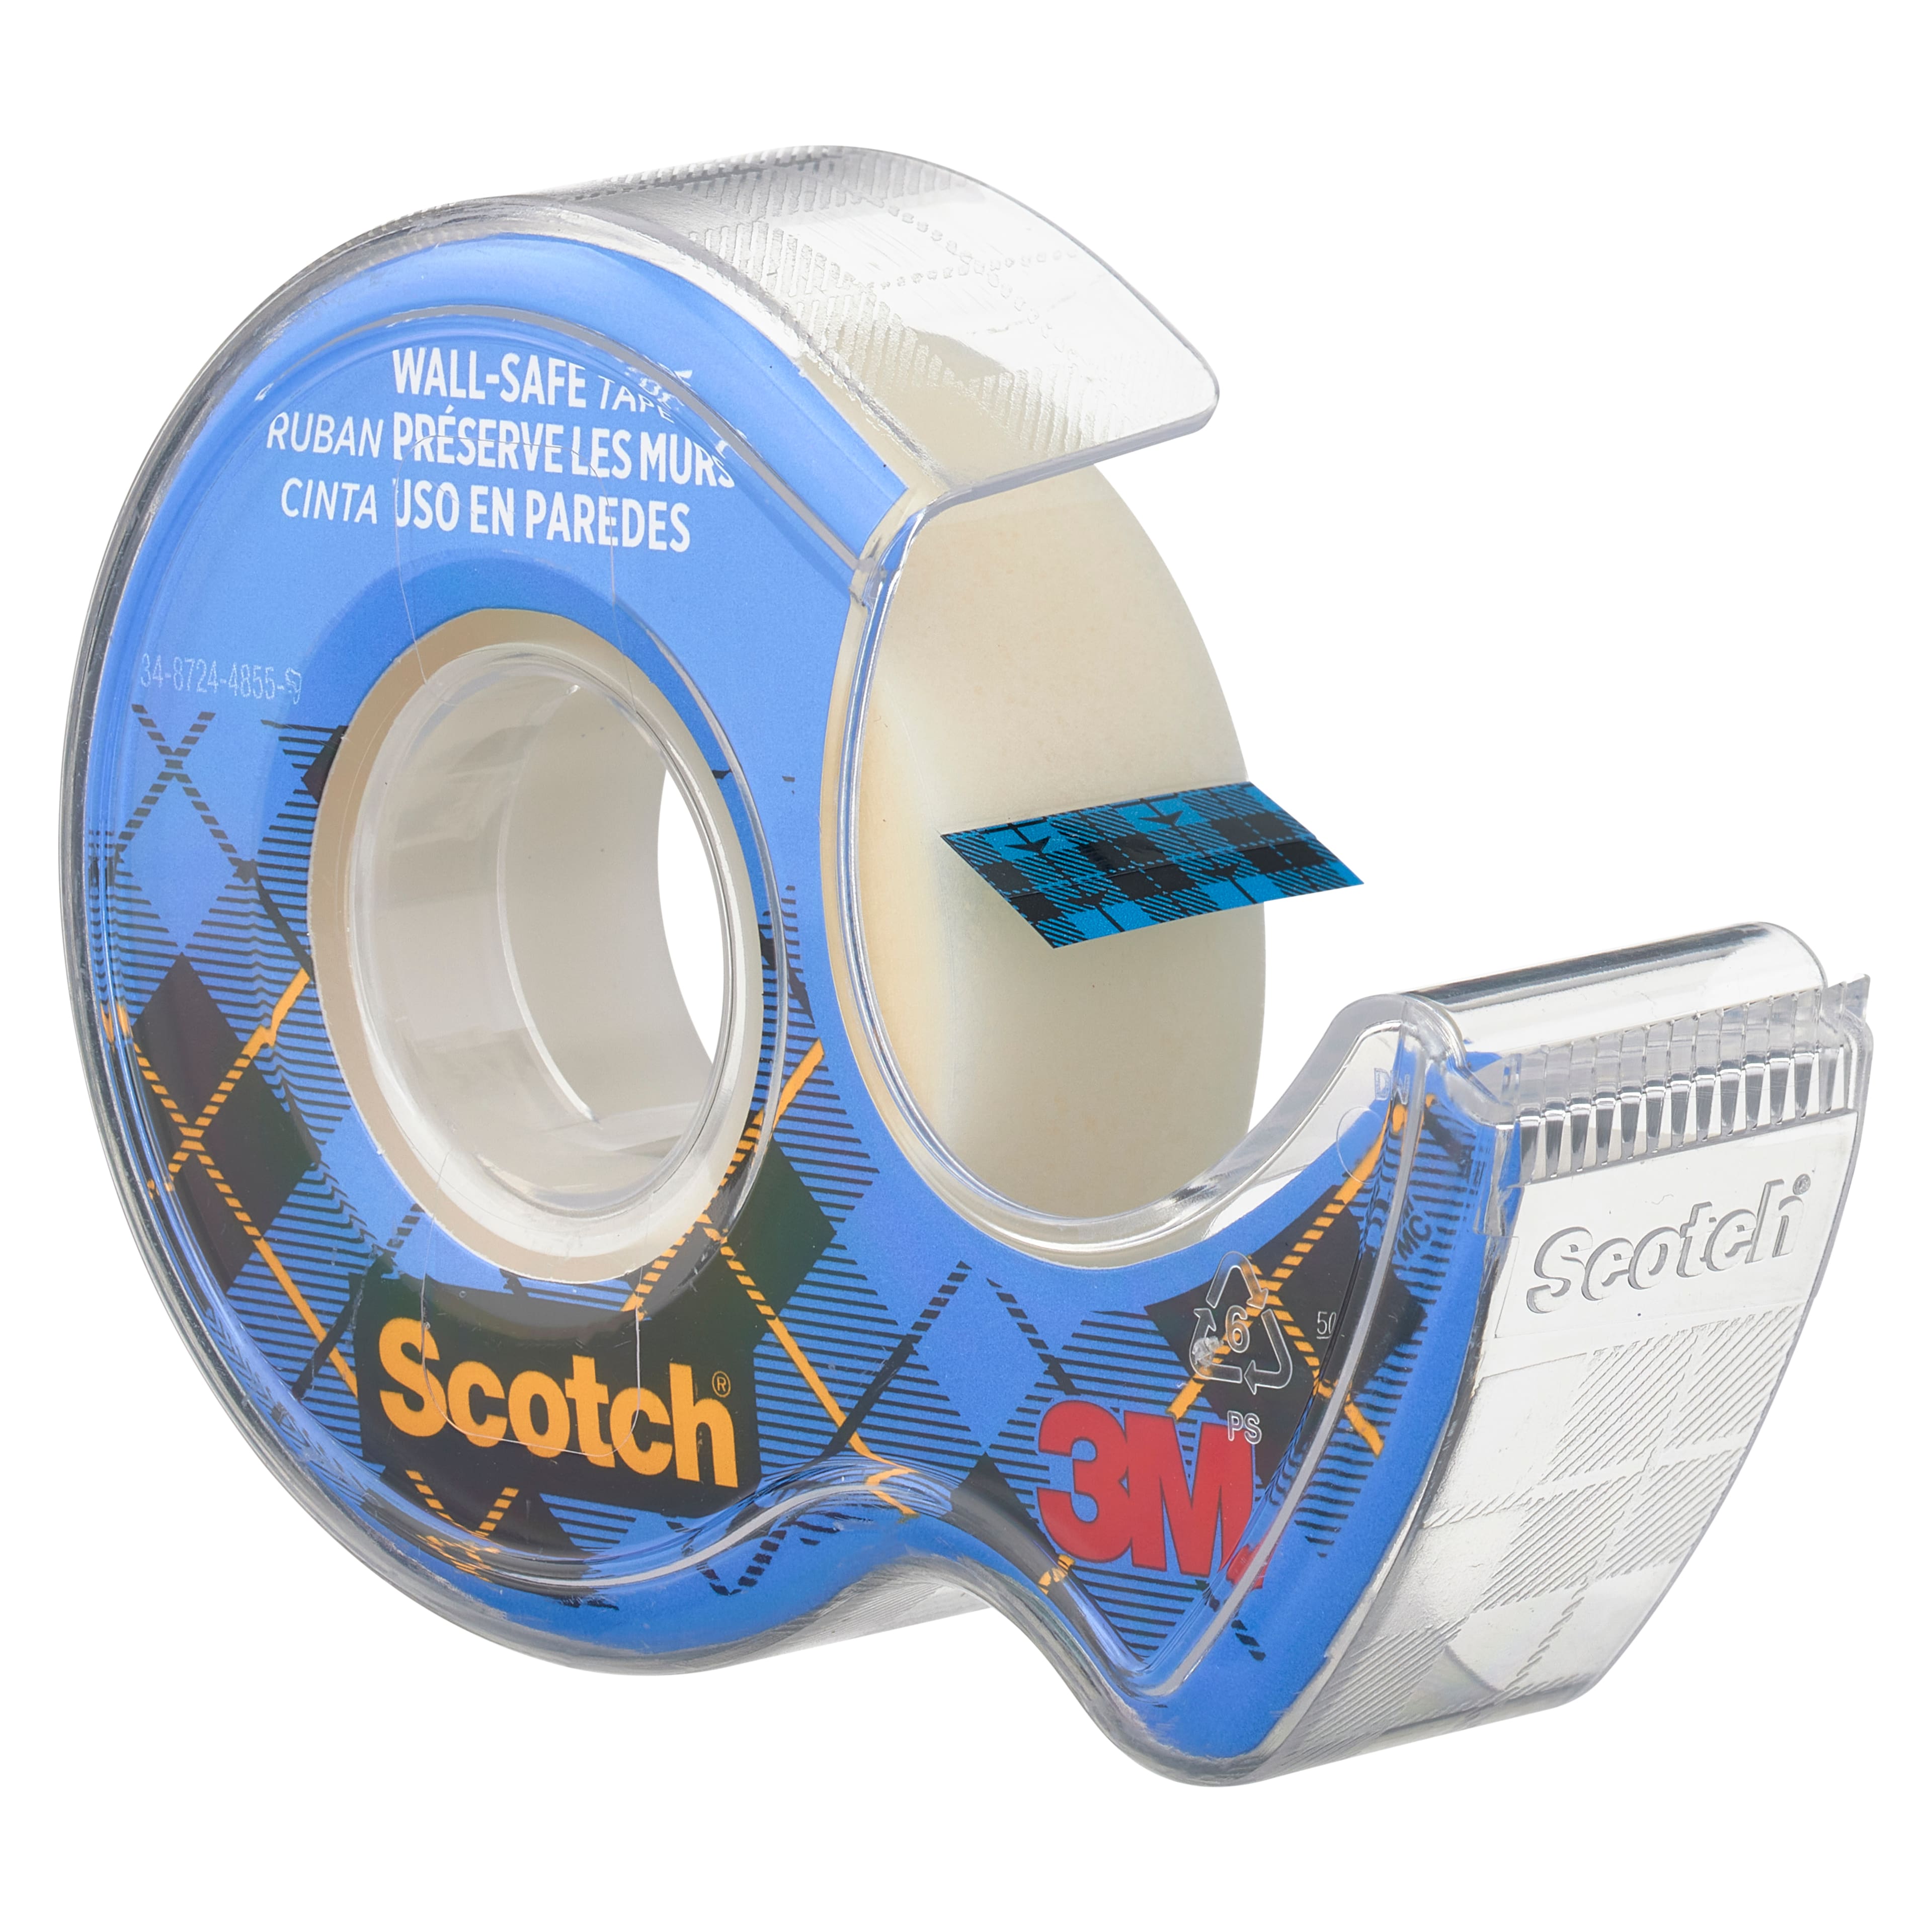  Scotch Wall-Safe Tape, 2 Rolls, Sticks Securely, Removes  Cleanly, Invisible, Designed for Displaying, Photo Safe, 3/4 in x 800 in  (813S2) : Office Products